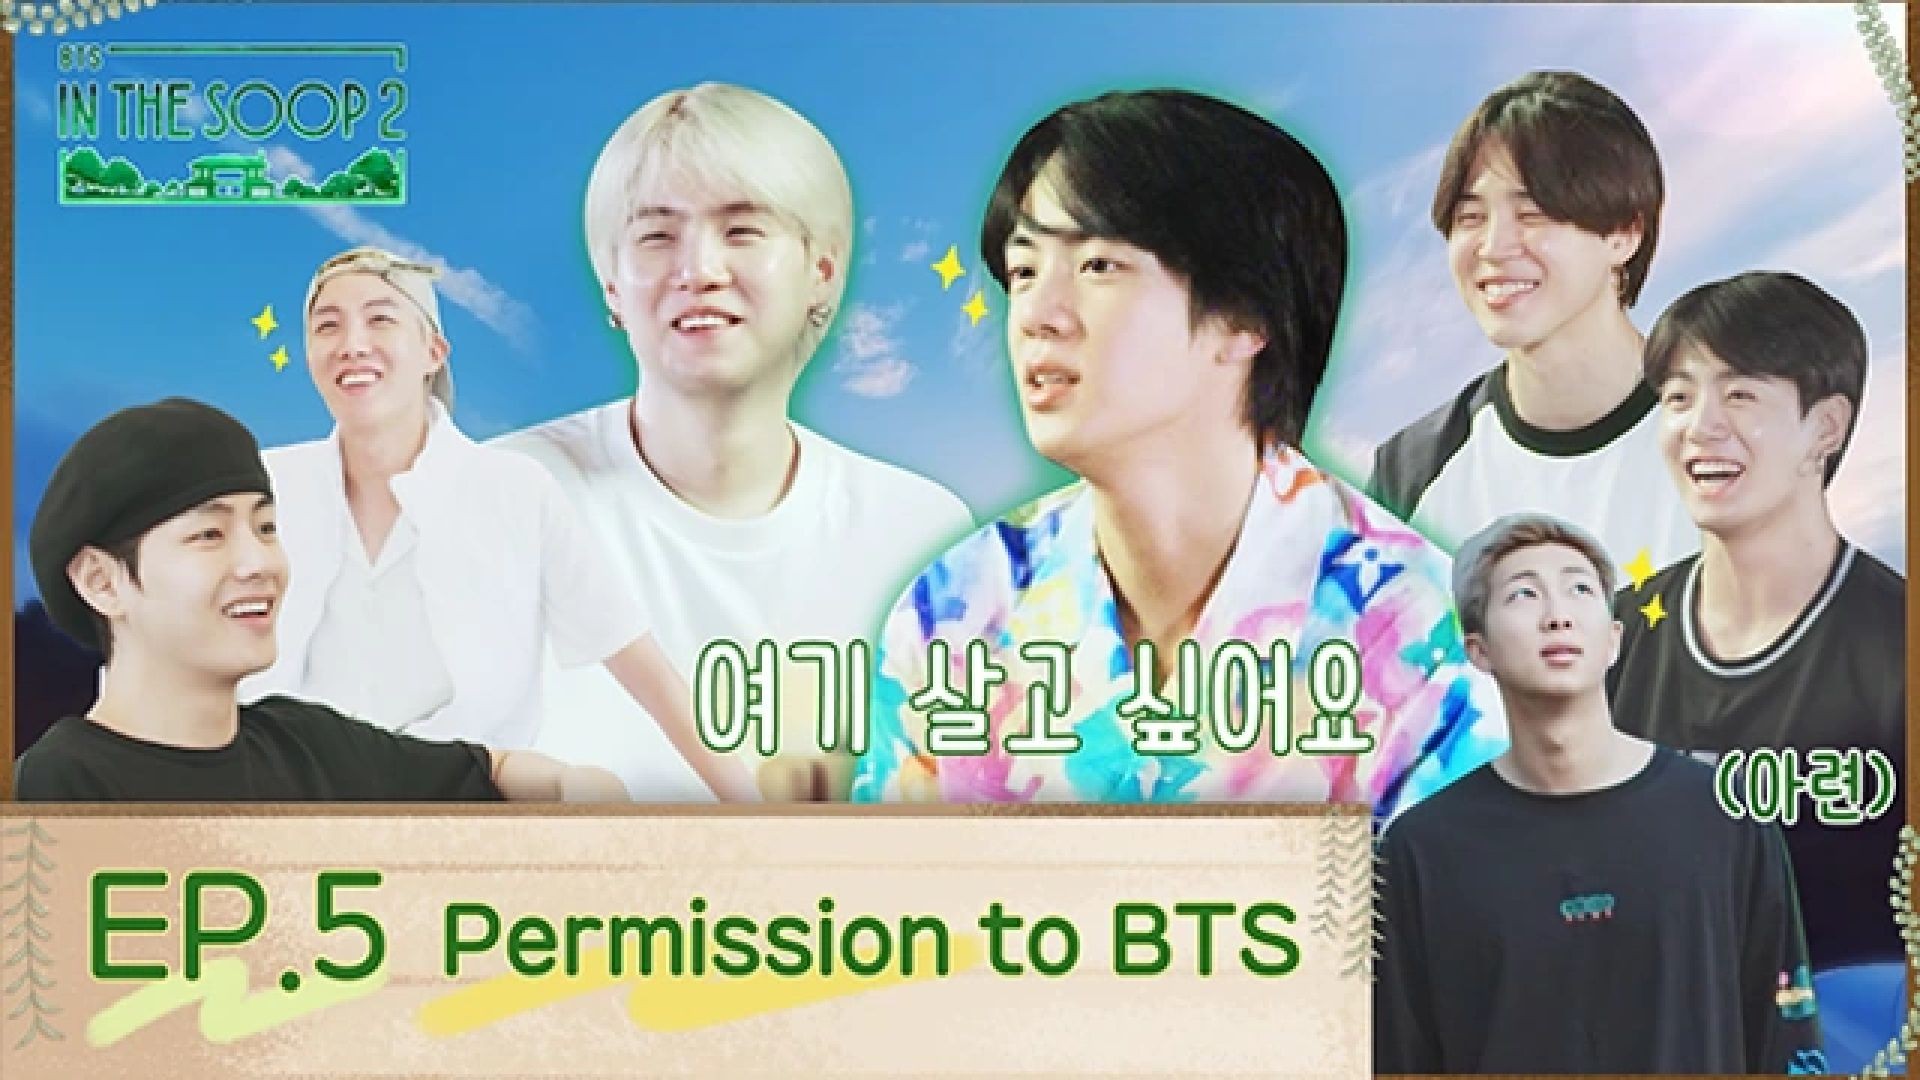 S2 - E05: Permission to BTS  | In The Soop